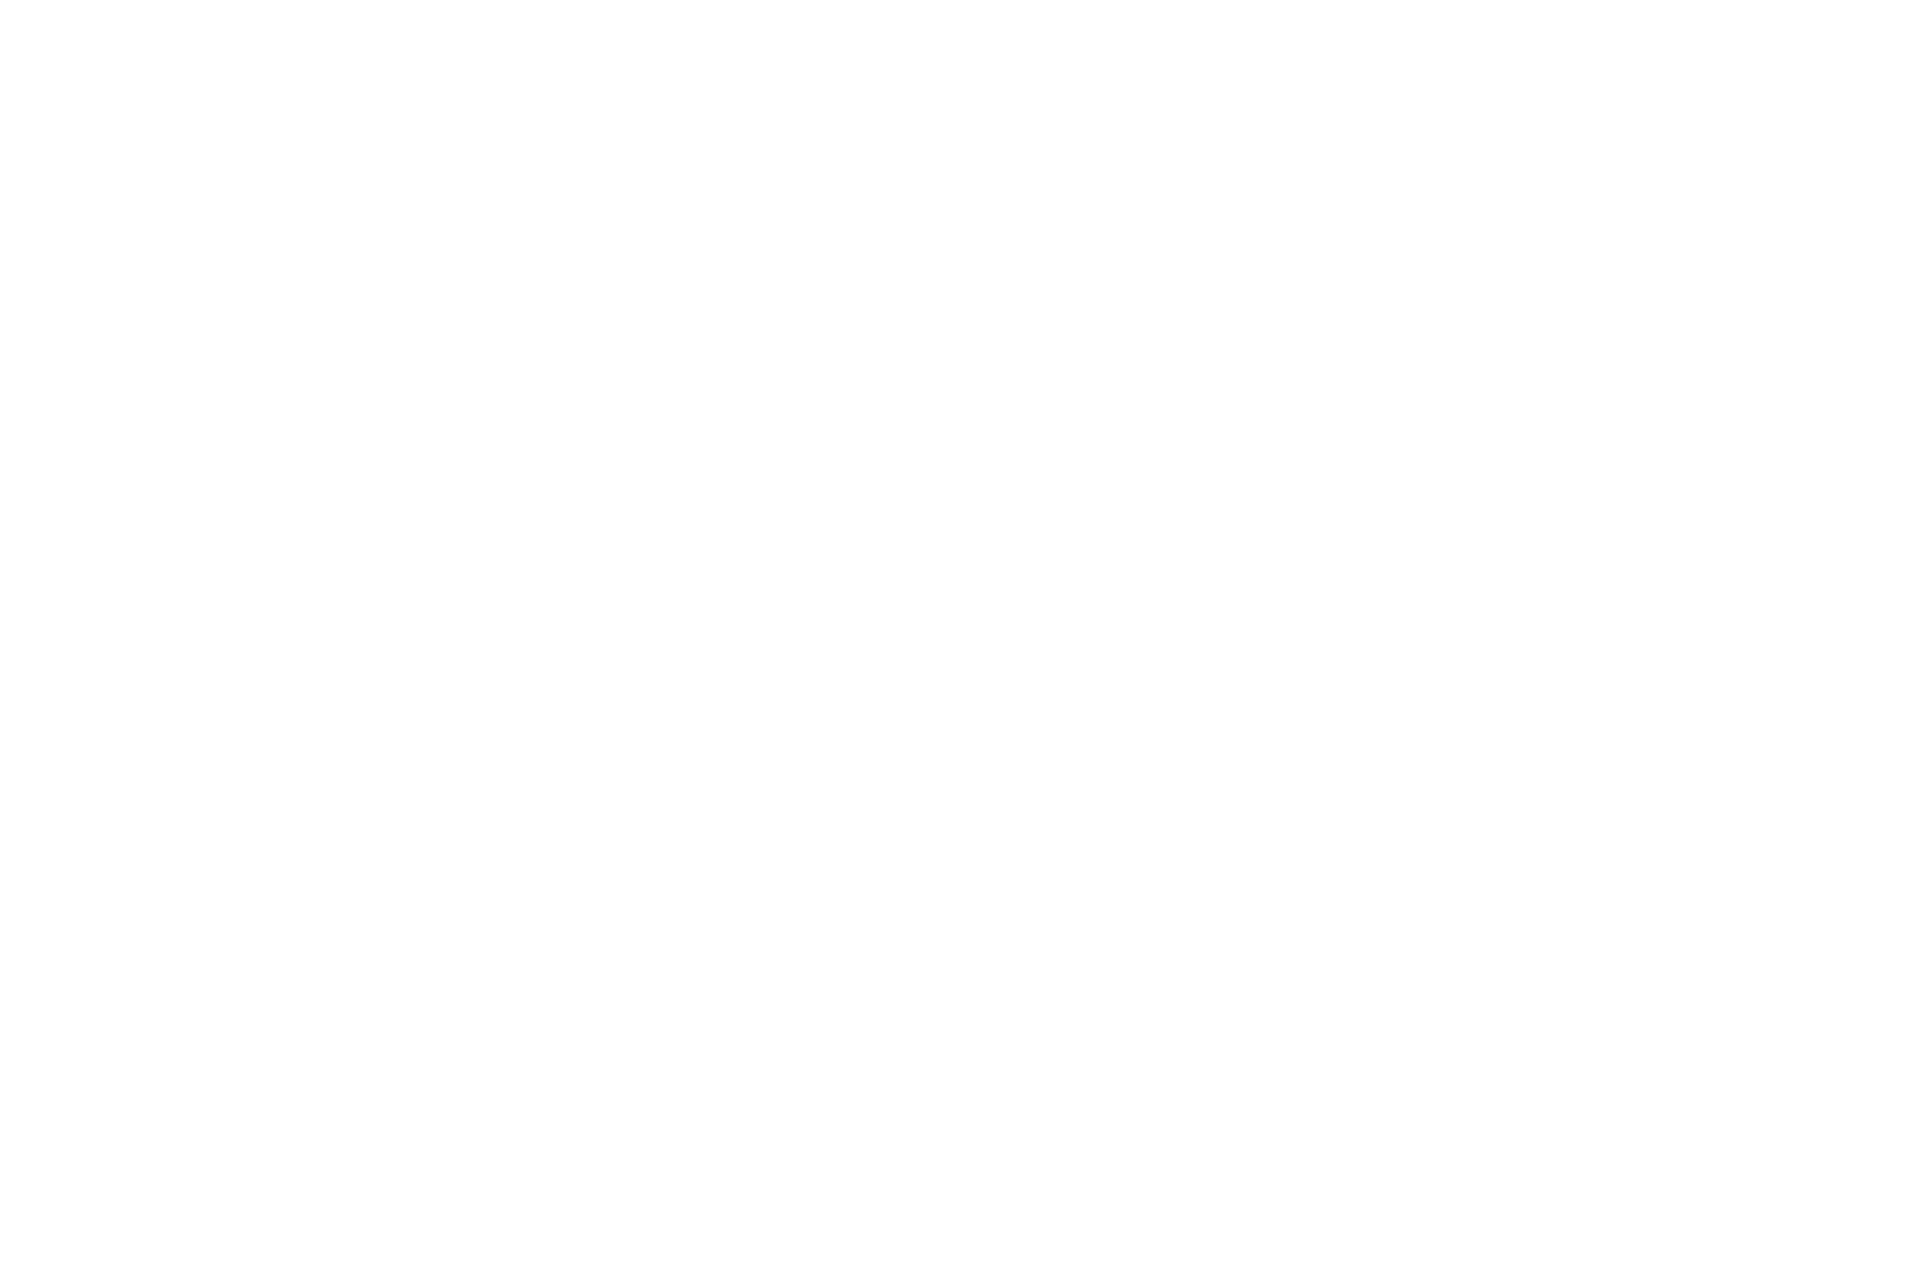 19 October HIE Logo And Support By